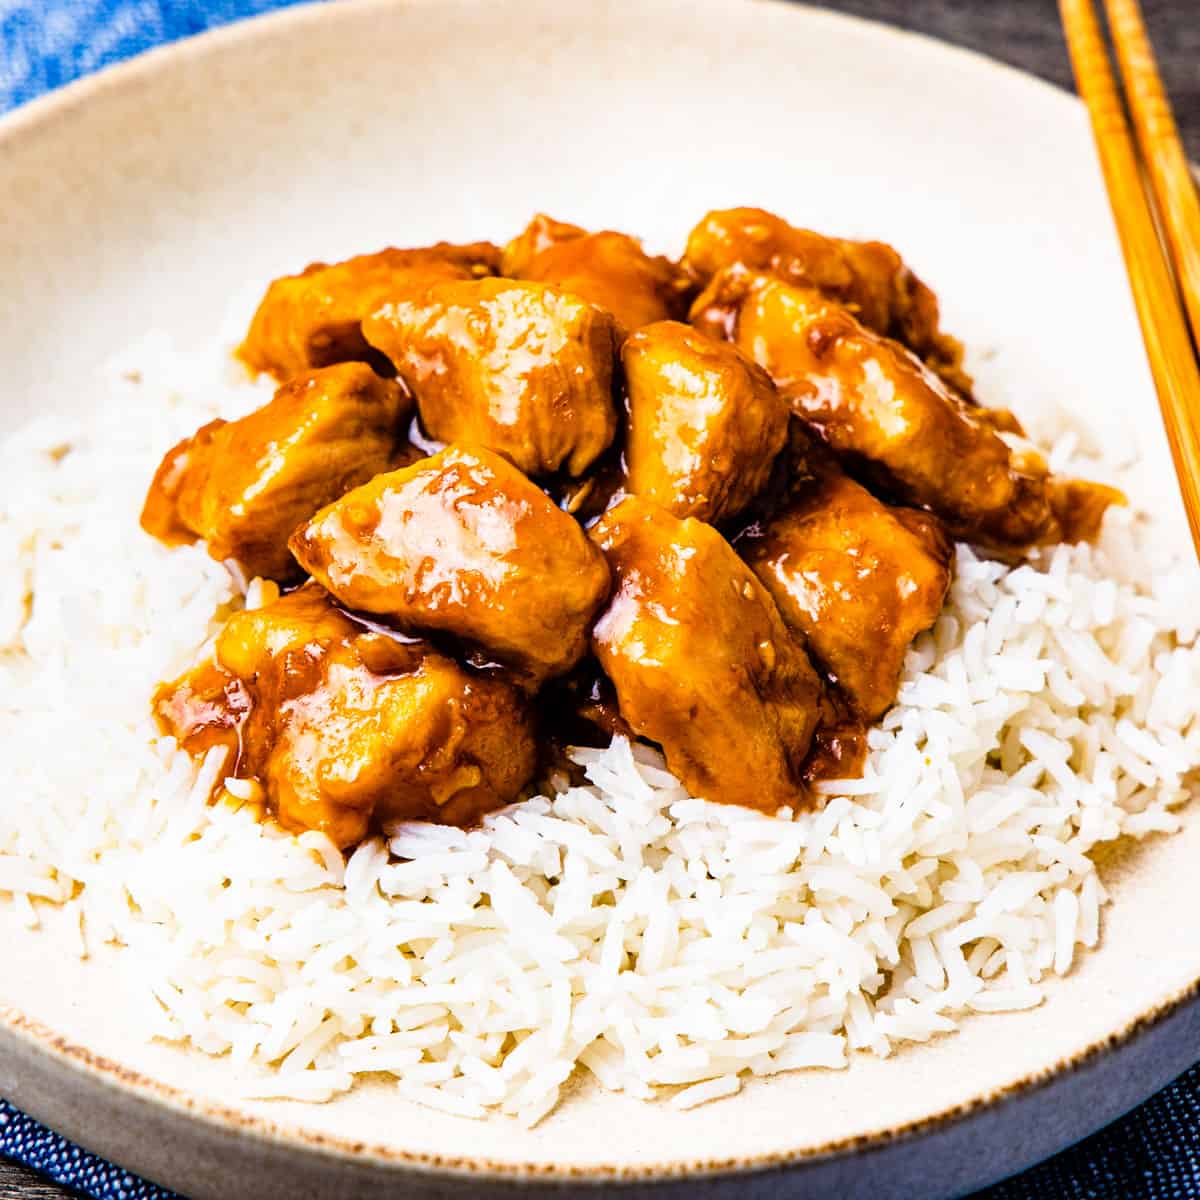 Honey bourbon chicken on top of rice on a light colored plate.